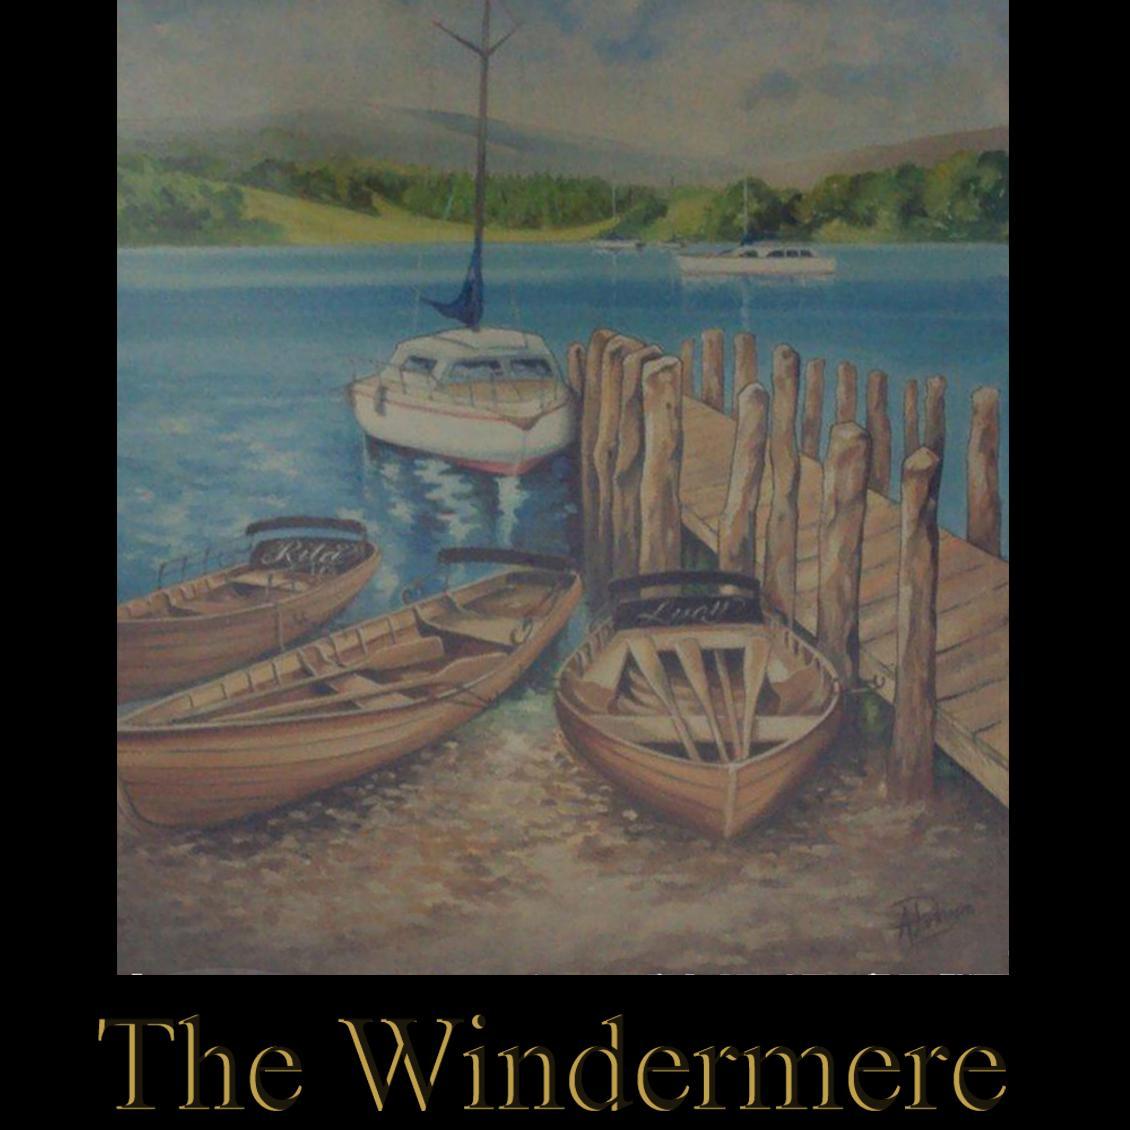 The Windermere